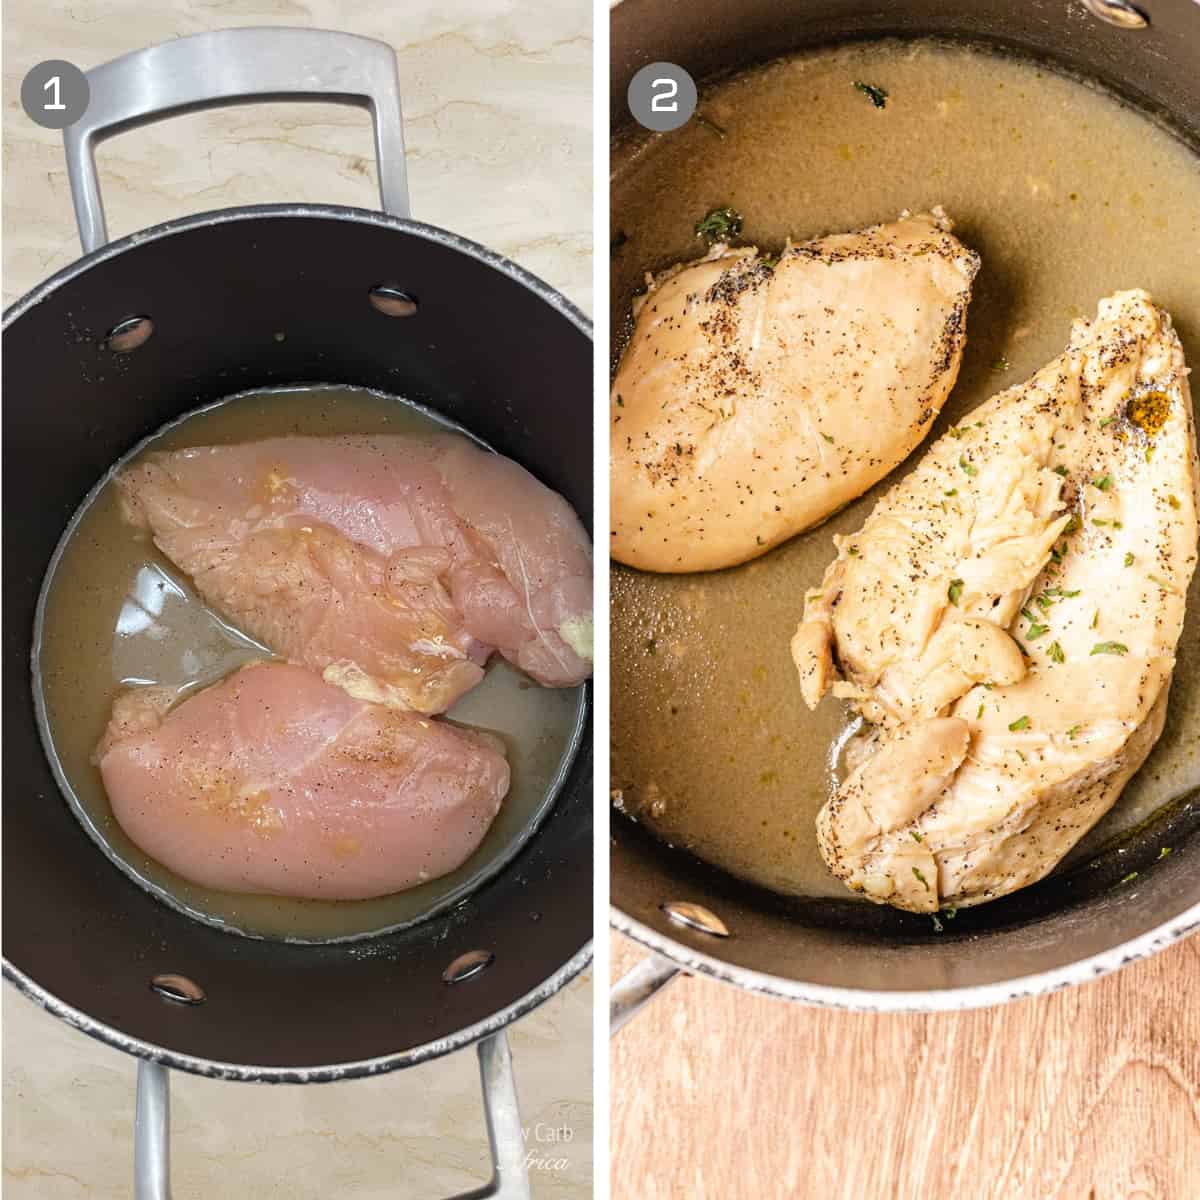 Steps for boiling chicken breast